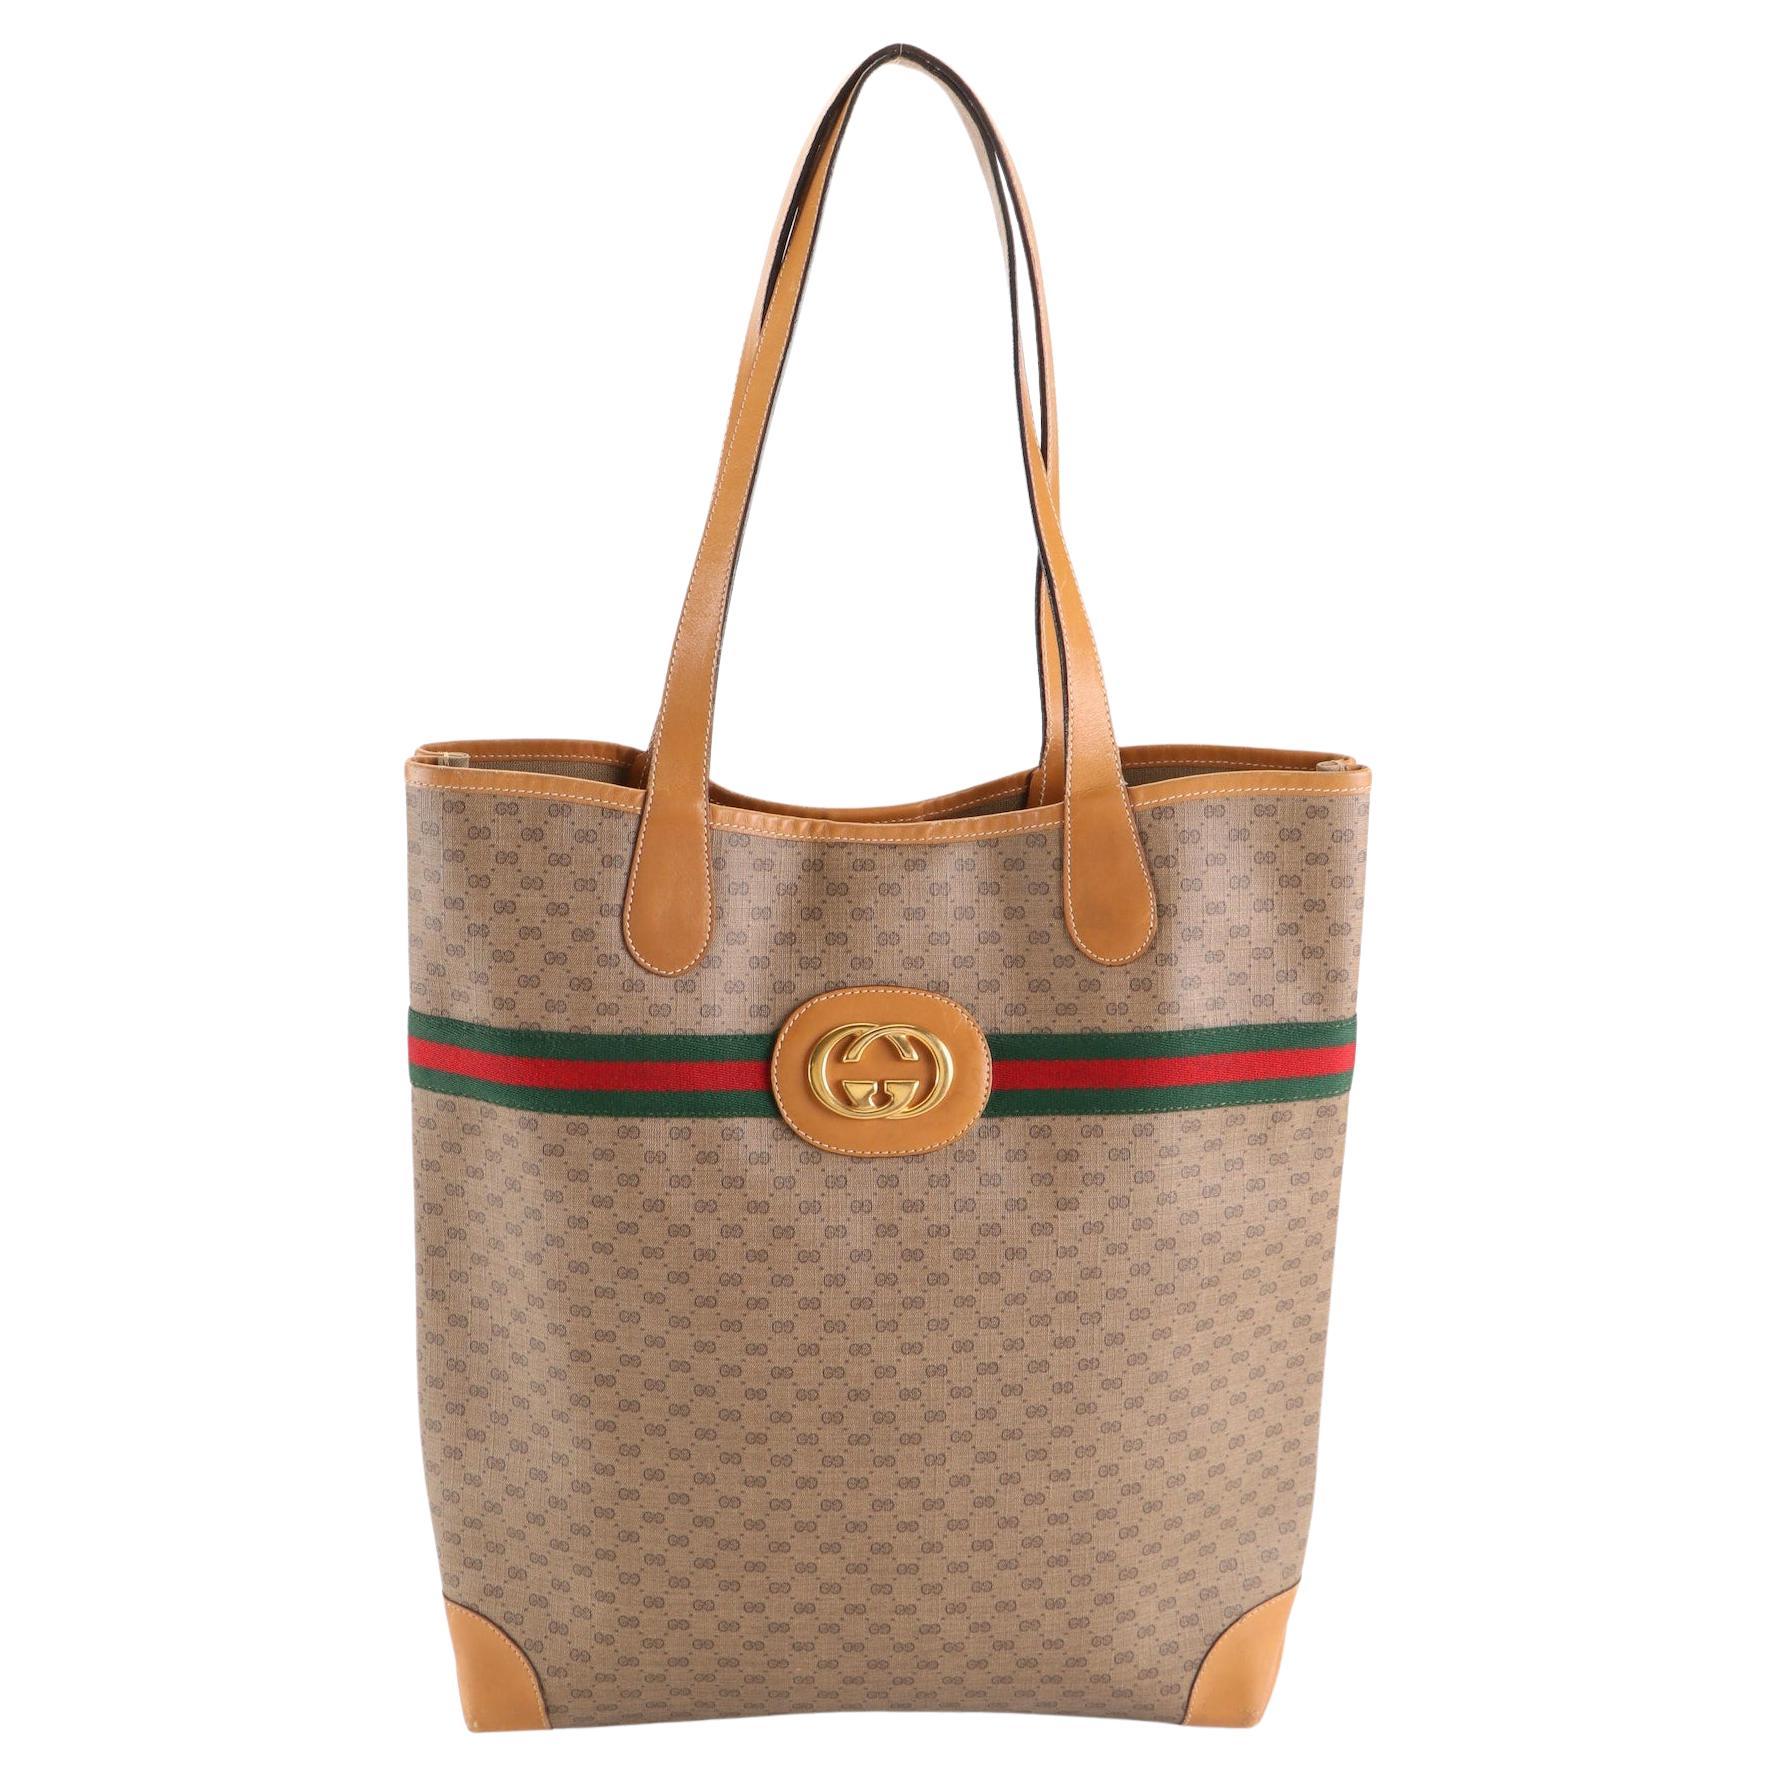 Gucci
Excellent Condition for it's Age
A late 80's, Early 90's Model
Micro GG Web Tote
Leather and Canvas GG
A Rare Find In this Condition
Date Code/Serial Number
Brown Canvas Lining with nearly no signs of use
Residual Storage Odor (vintage, not